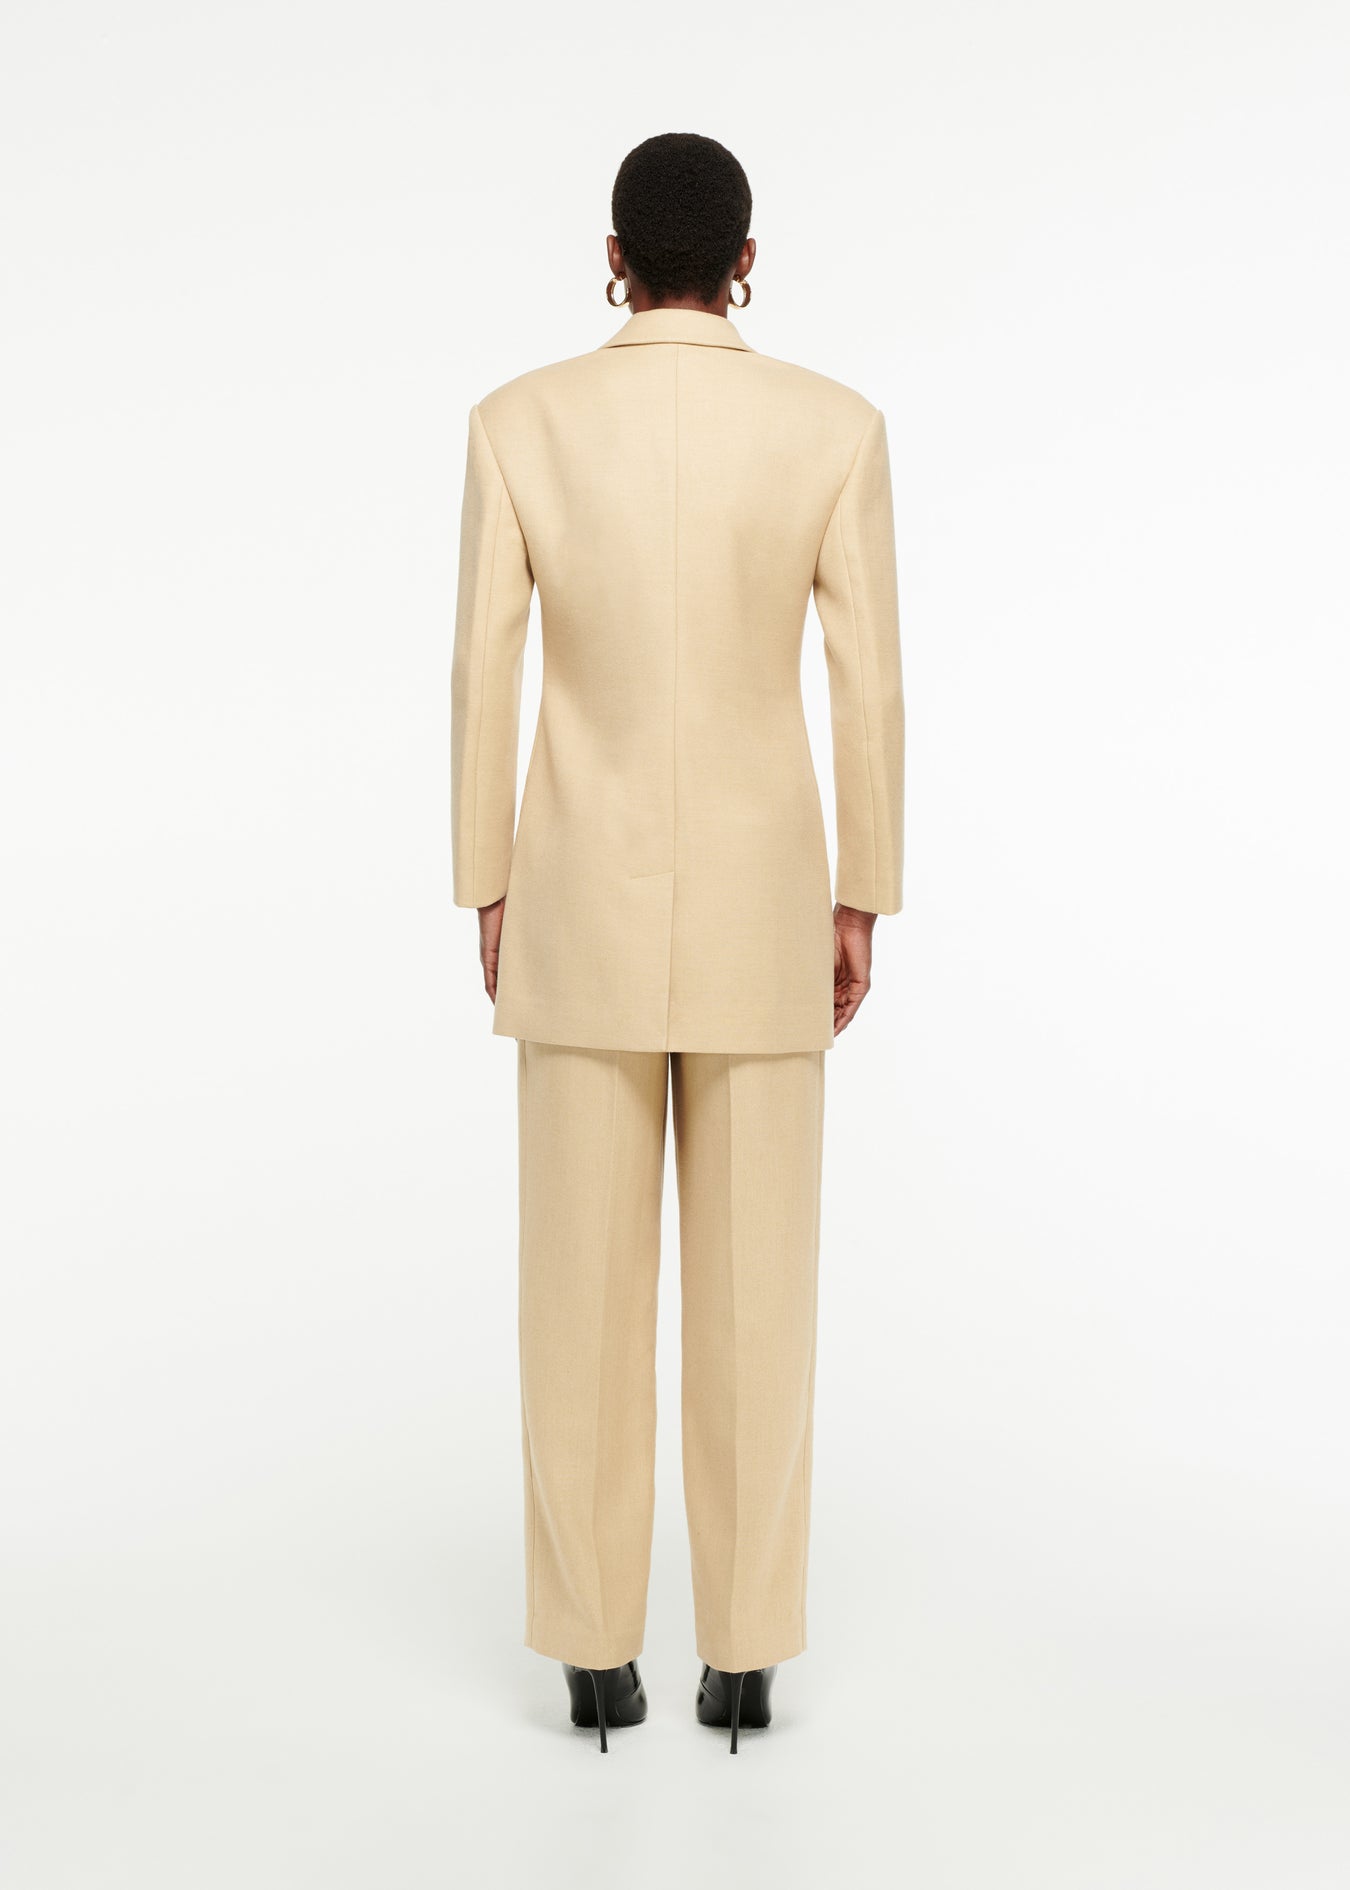 The back of a woman wearing the Oversized Double-Breasted Wool Blazer in Sand